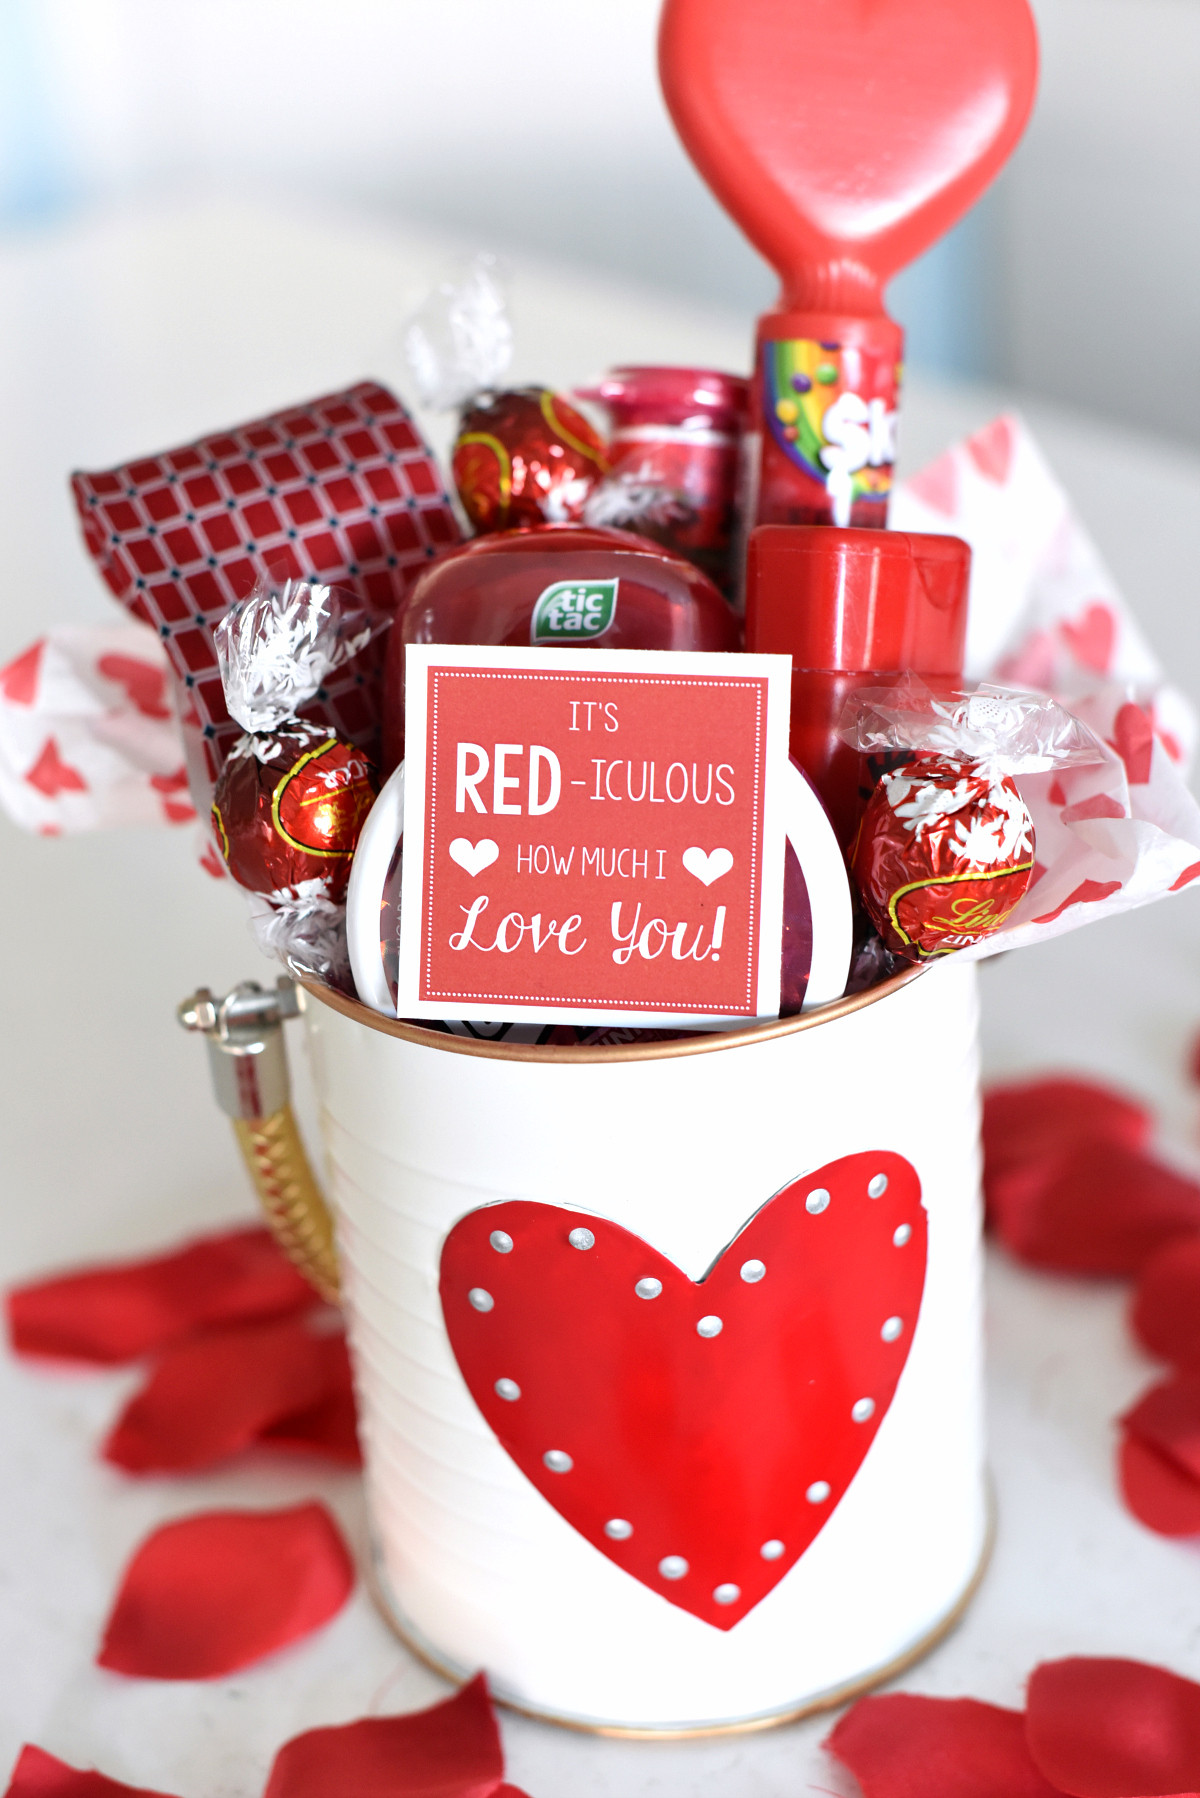 Good Valentines Day Gifts For Her
 Cute Valentine s Day Gift Idea RED iculous Basket